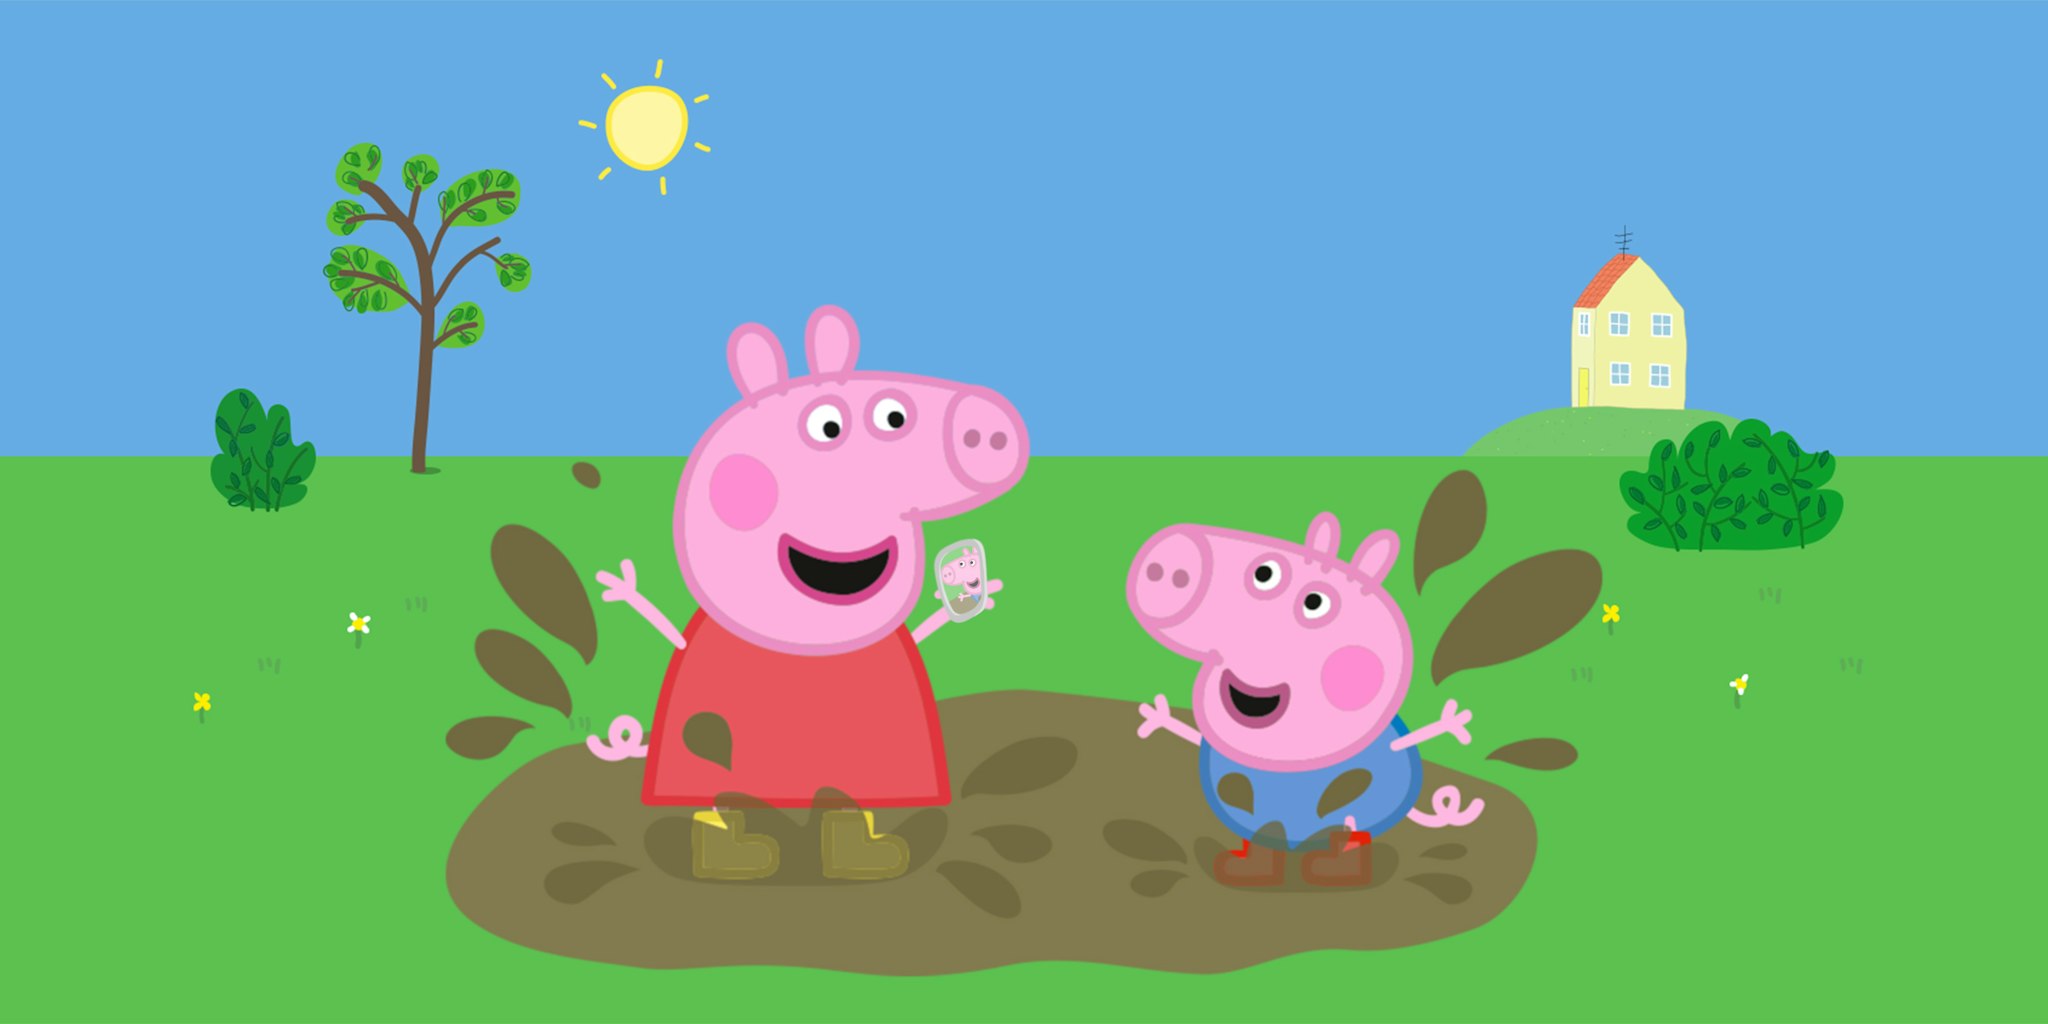 Peppa Pig 'Chocolate' Meme Gets Into Some Weird Places